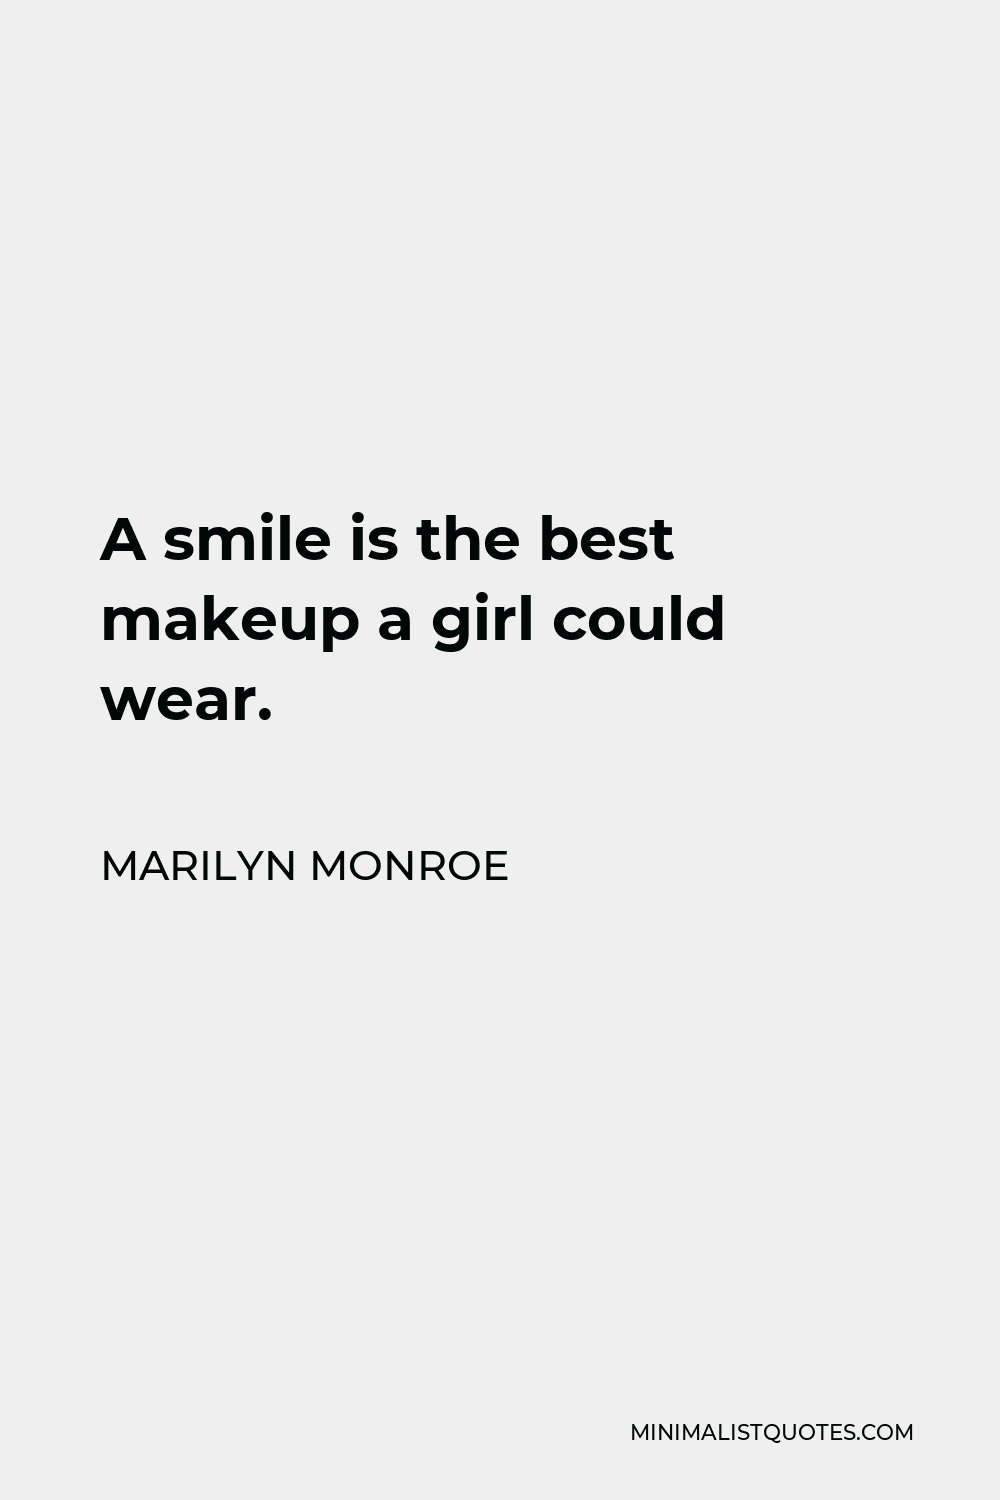 Marilyn Monroe Quote: A Smile Is The Best Makeup A Girl Could Wear.